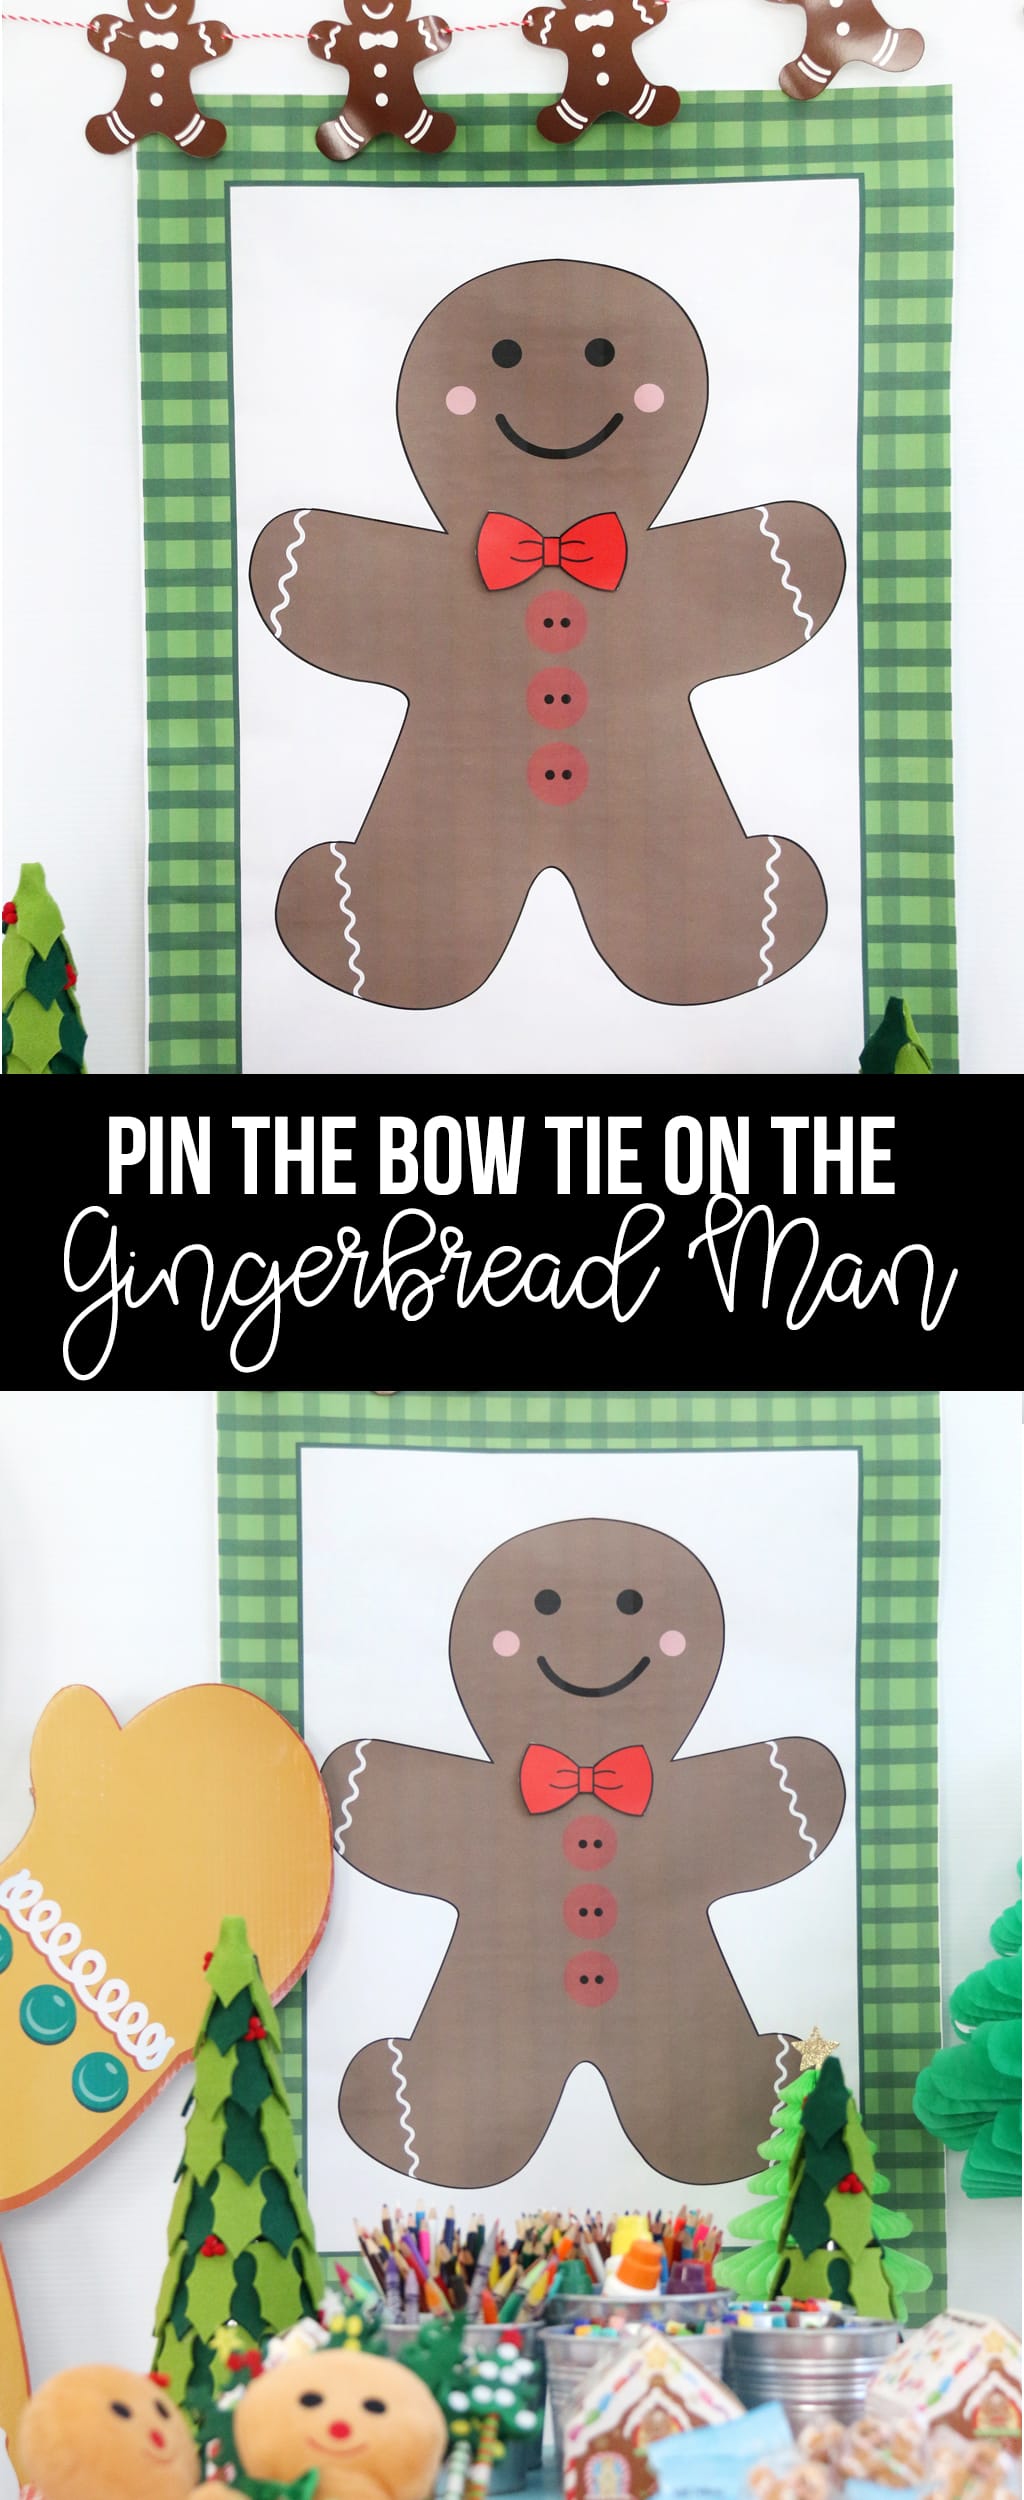 Pin the Bow Tie on the Gingerbread Man